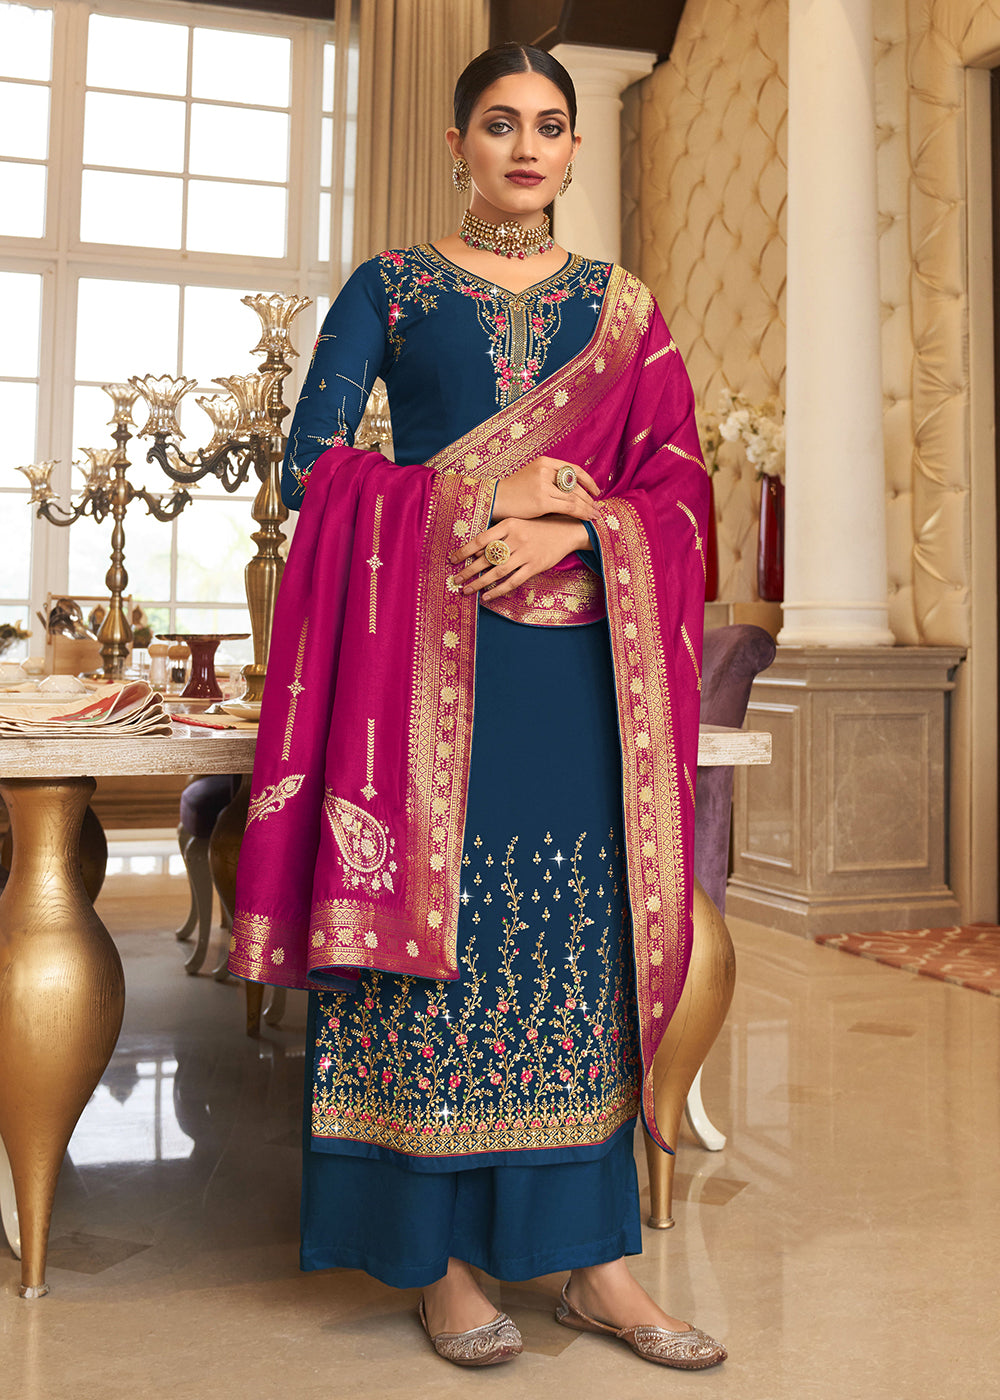 Buy Now Wedding Party Outstanding Blue Thread & Zari Salwar Suit Online in USA, UK, Canada & Worldwide at Empress Clothing.